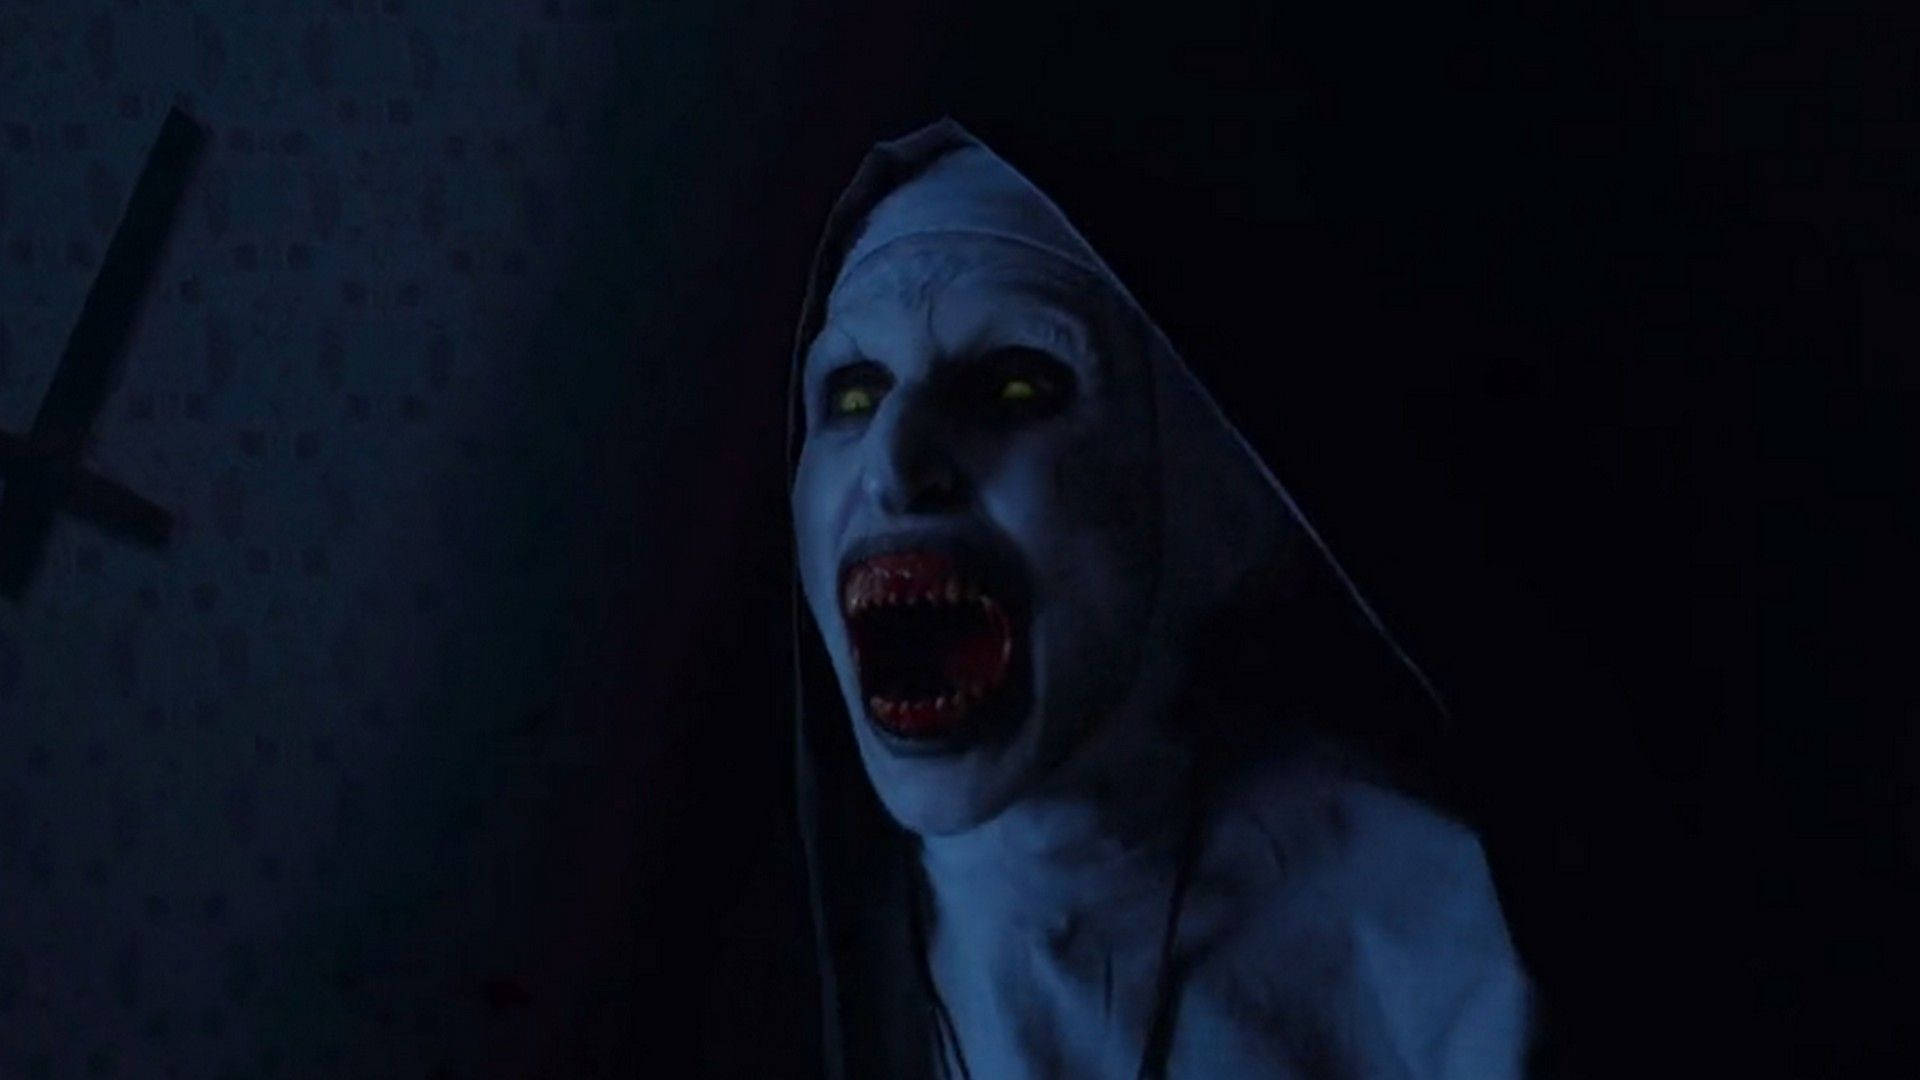 The Conjuring Screaming Valak Background